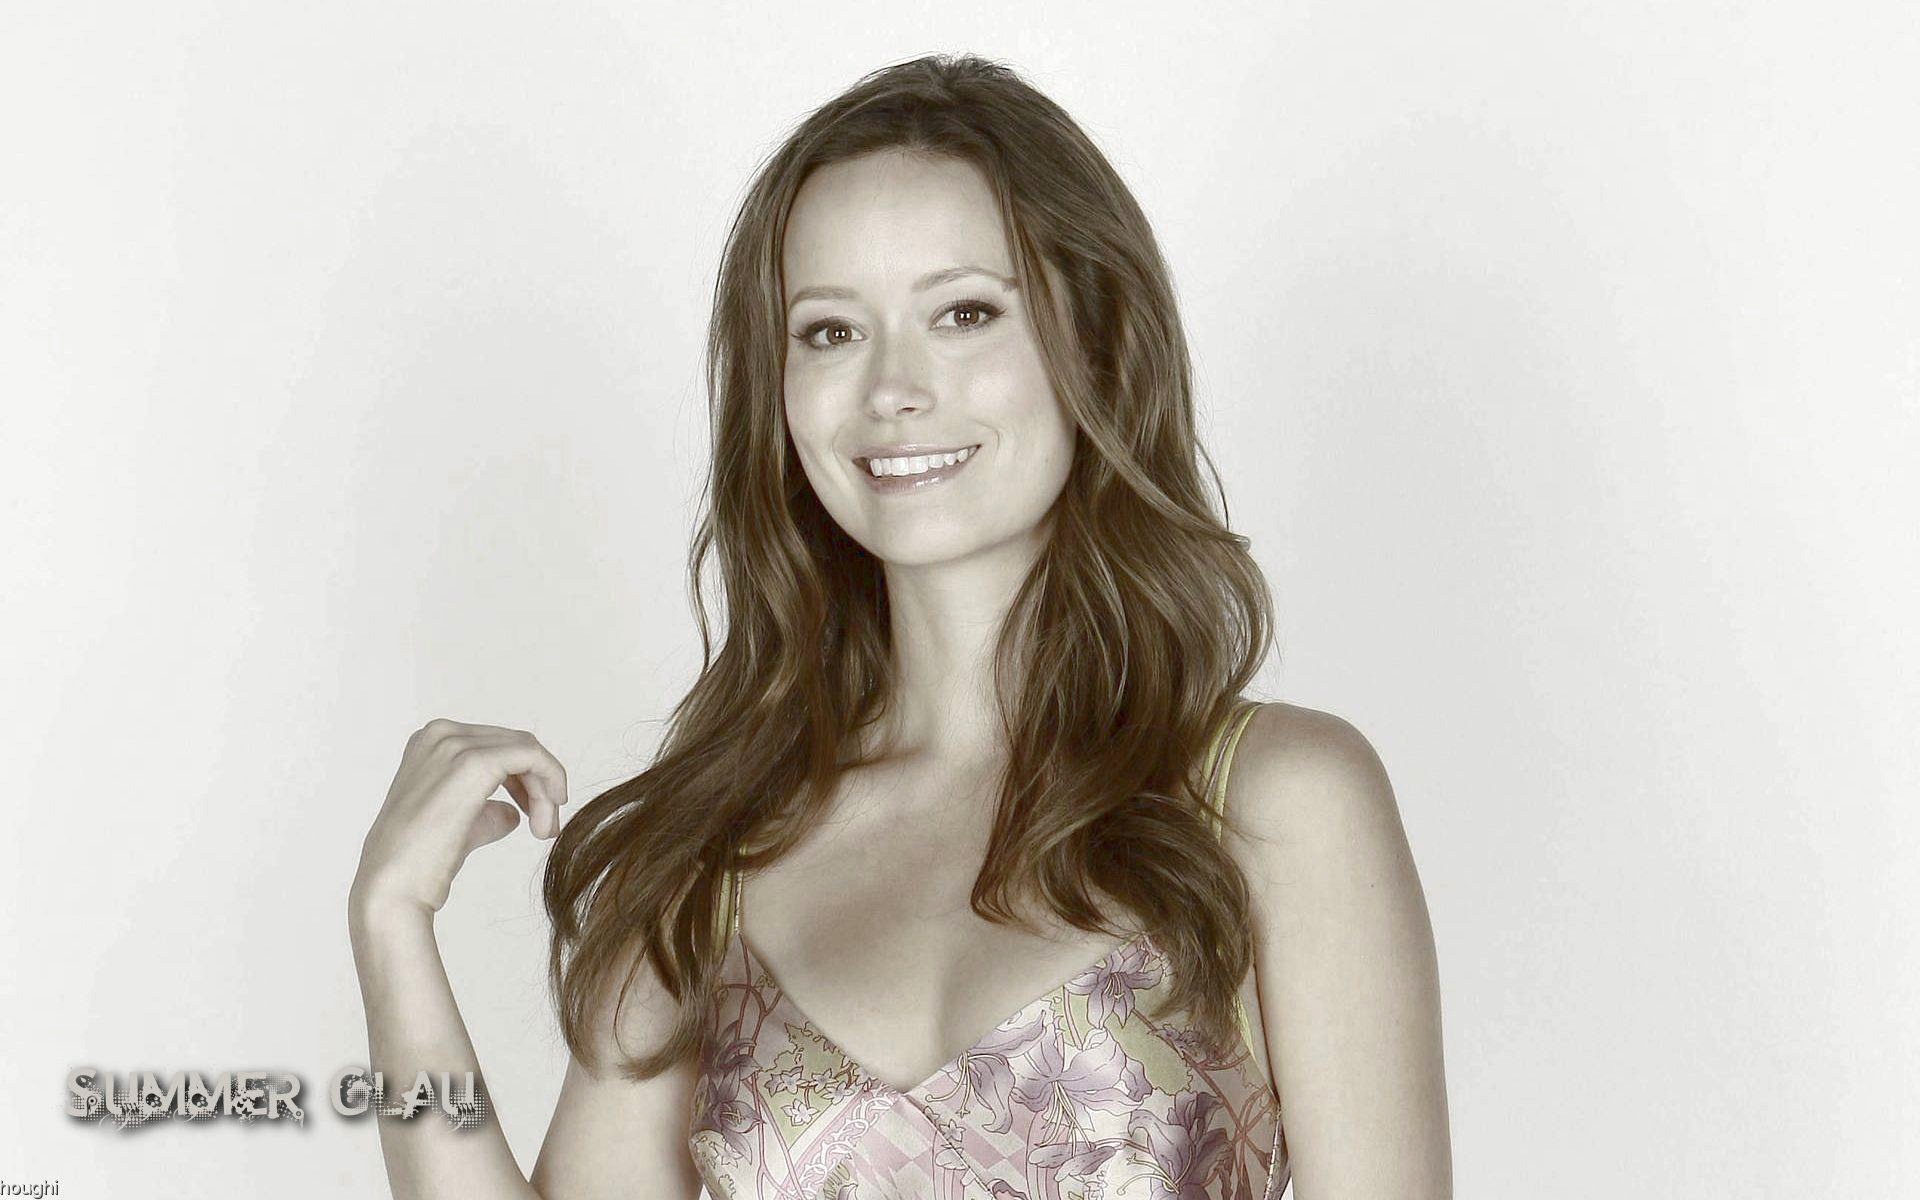 Summer Glau #011 - 1920x1200 Wallpapers Pictures Photos Images